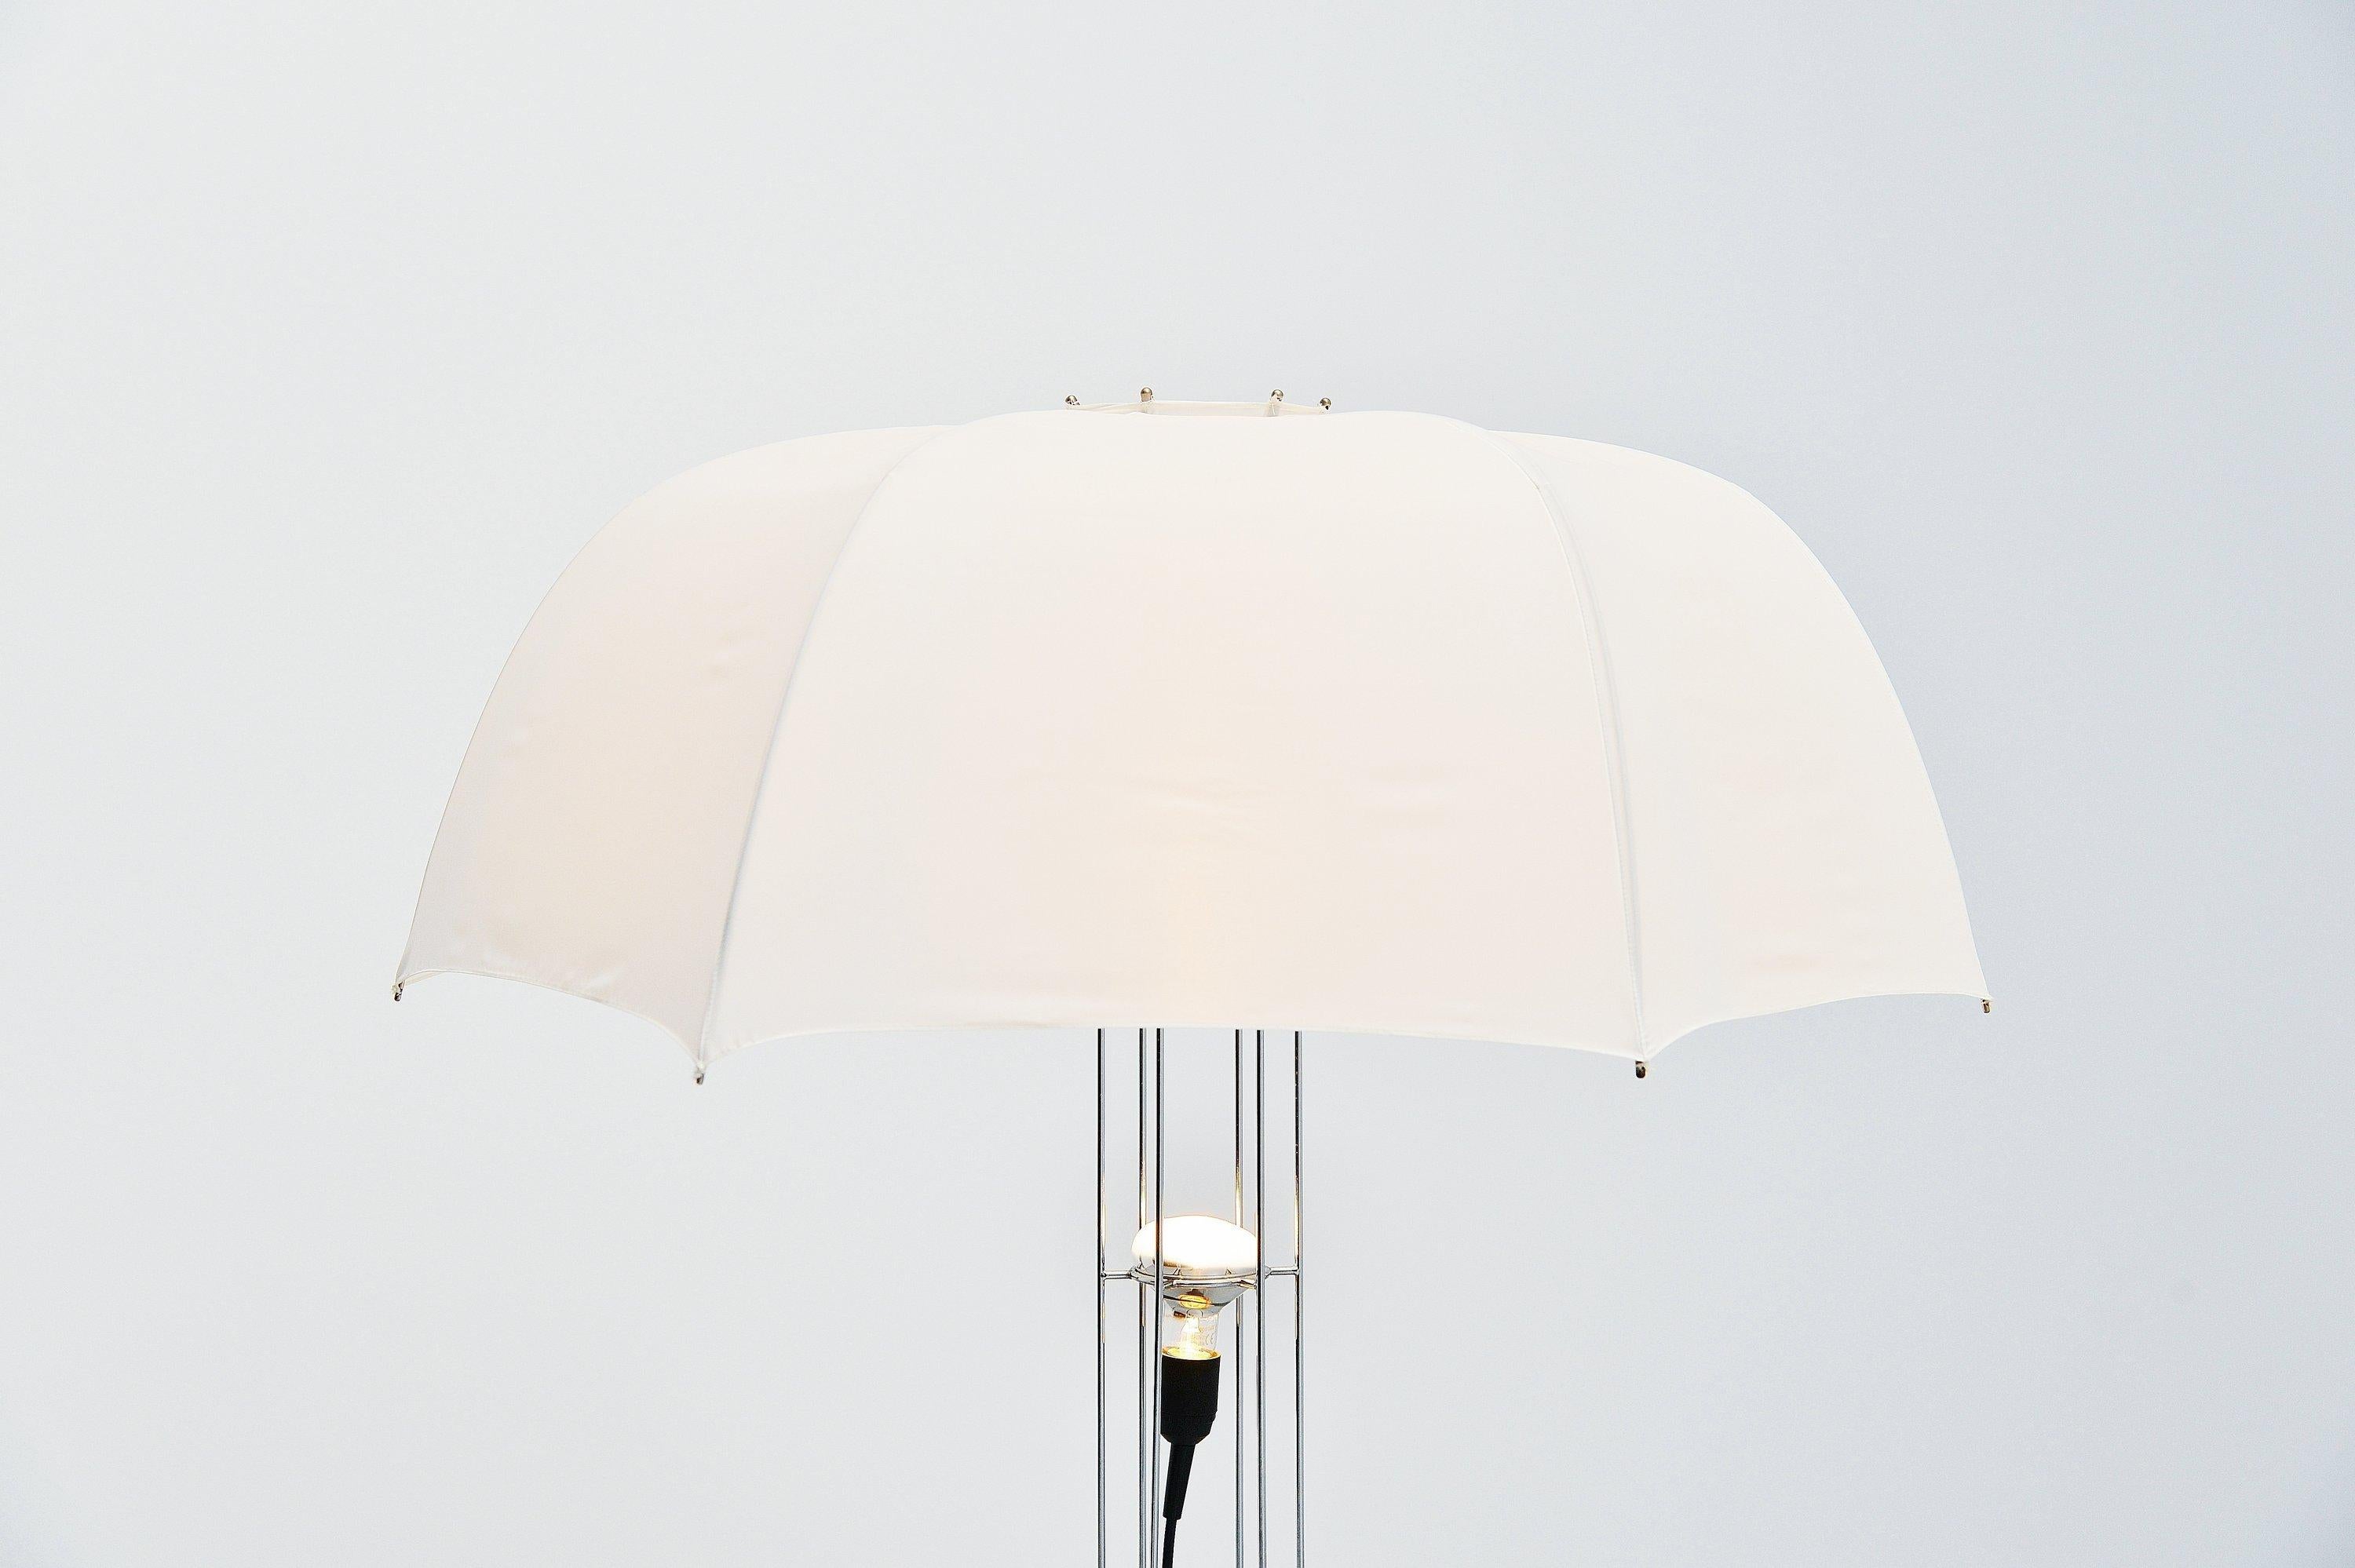 Iconic umbrella floor lamp designed by Gijs Bakker and manufactured by Artimeta, Holland 1973. Bakker was inspired by the type of lamp that photographers use. The five ribs continue as the five rods of the stand. The reflecting lamp is suspended in